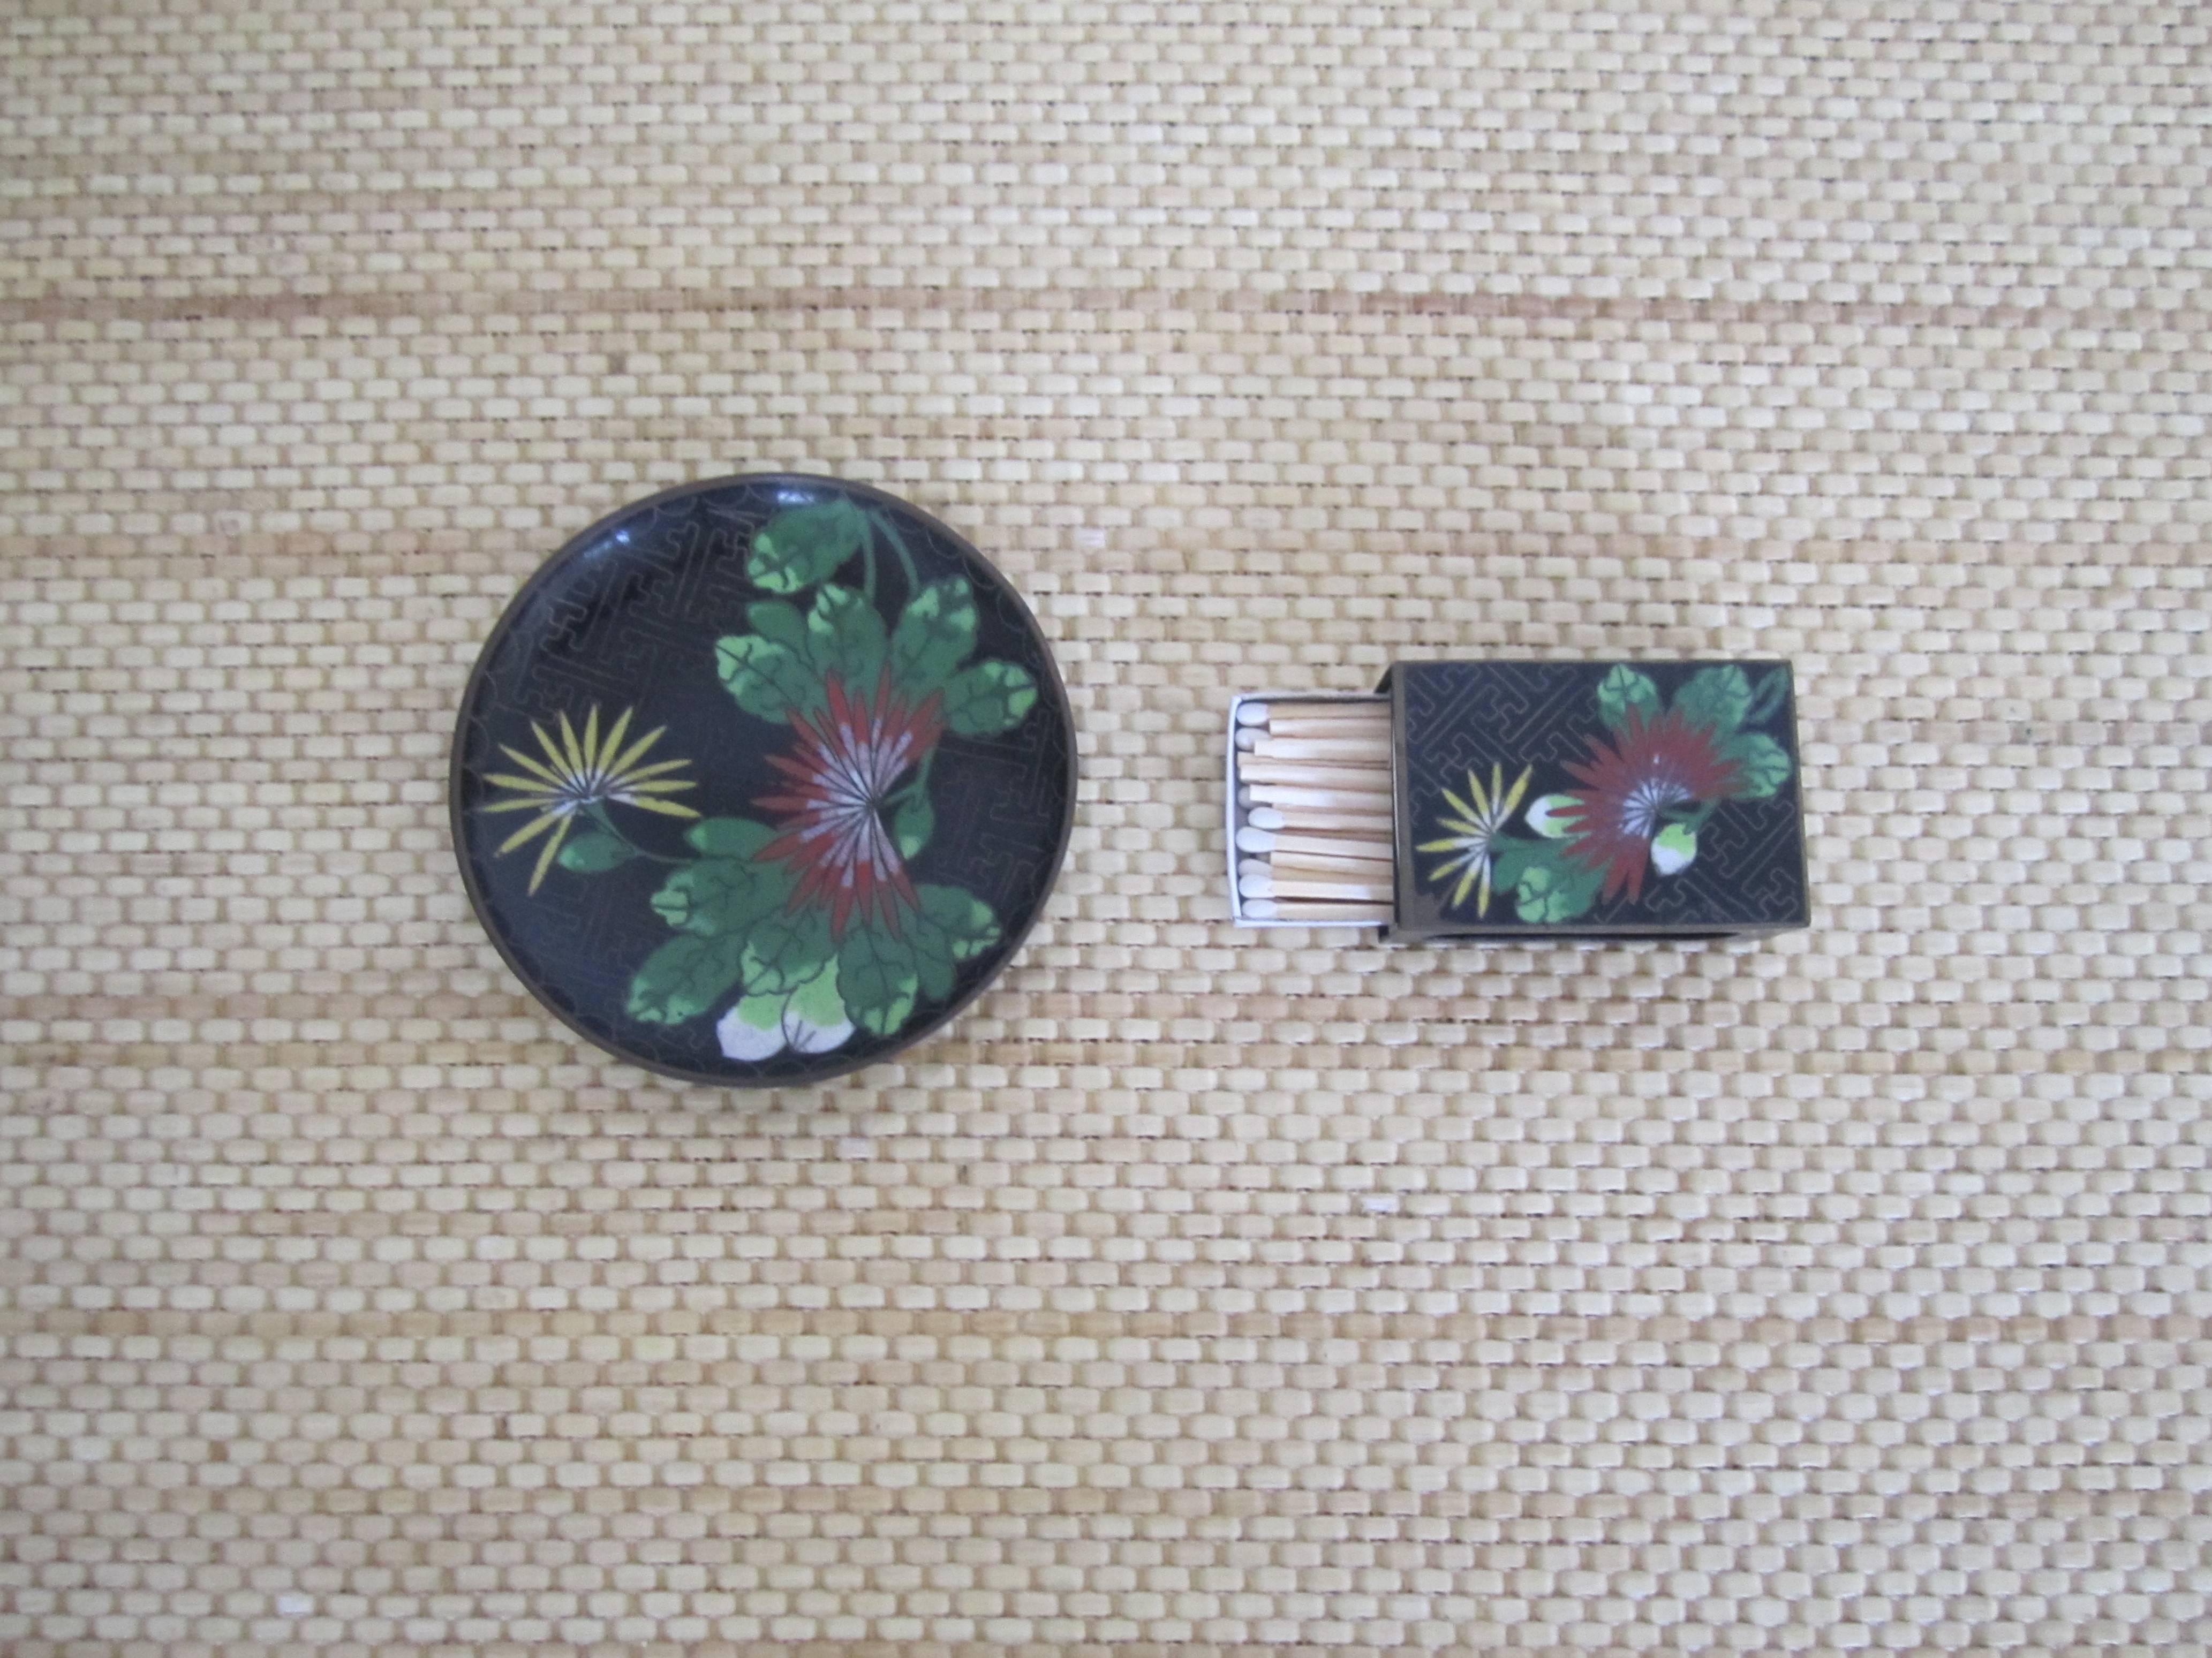 An enamel Chinese Cloisonné match box case set, circa early-20th century. Set includes 1 matchbox holder, and 1 dish/plate (for used matches, ashes.) This beautiful set is made of black, emerald green, light green, yellow, red and white enamel, in